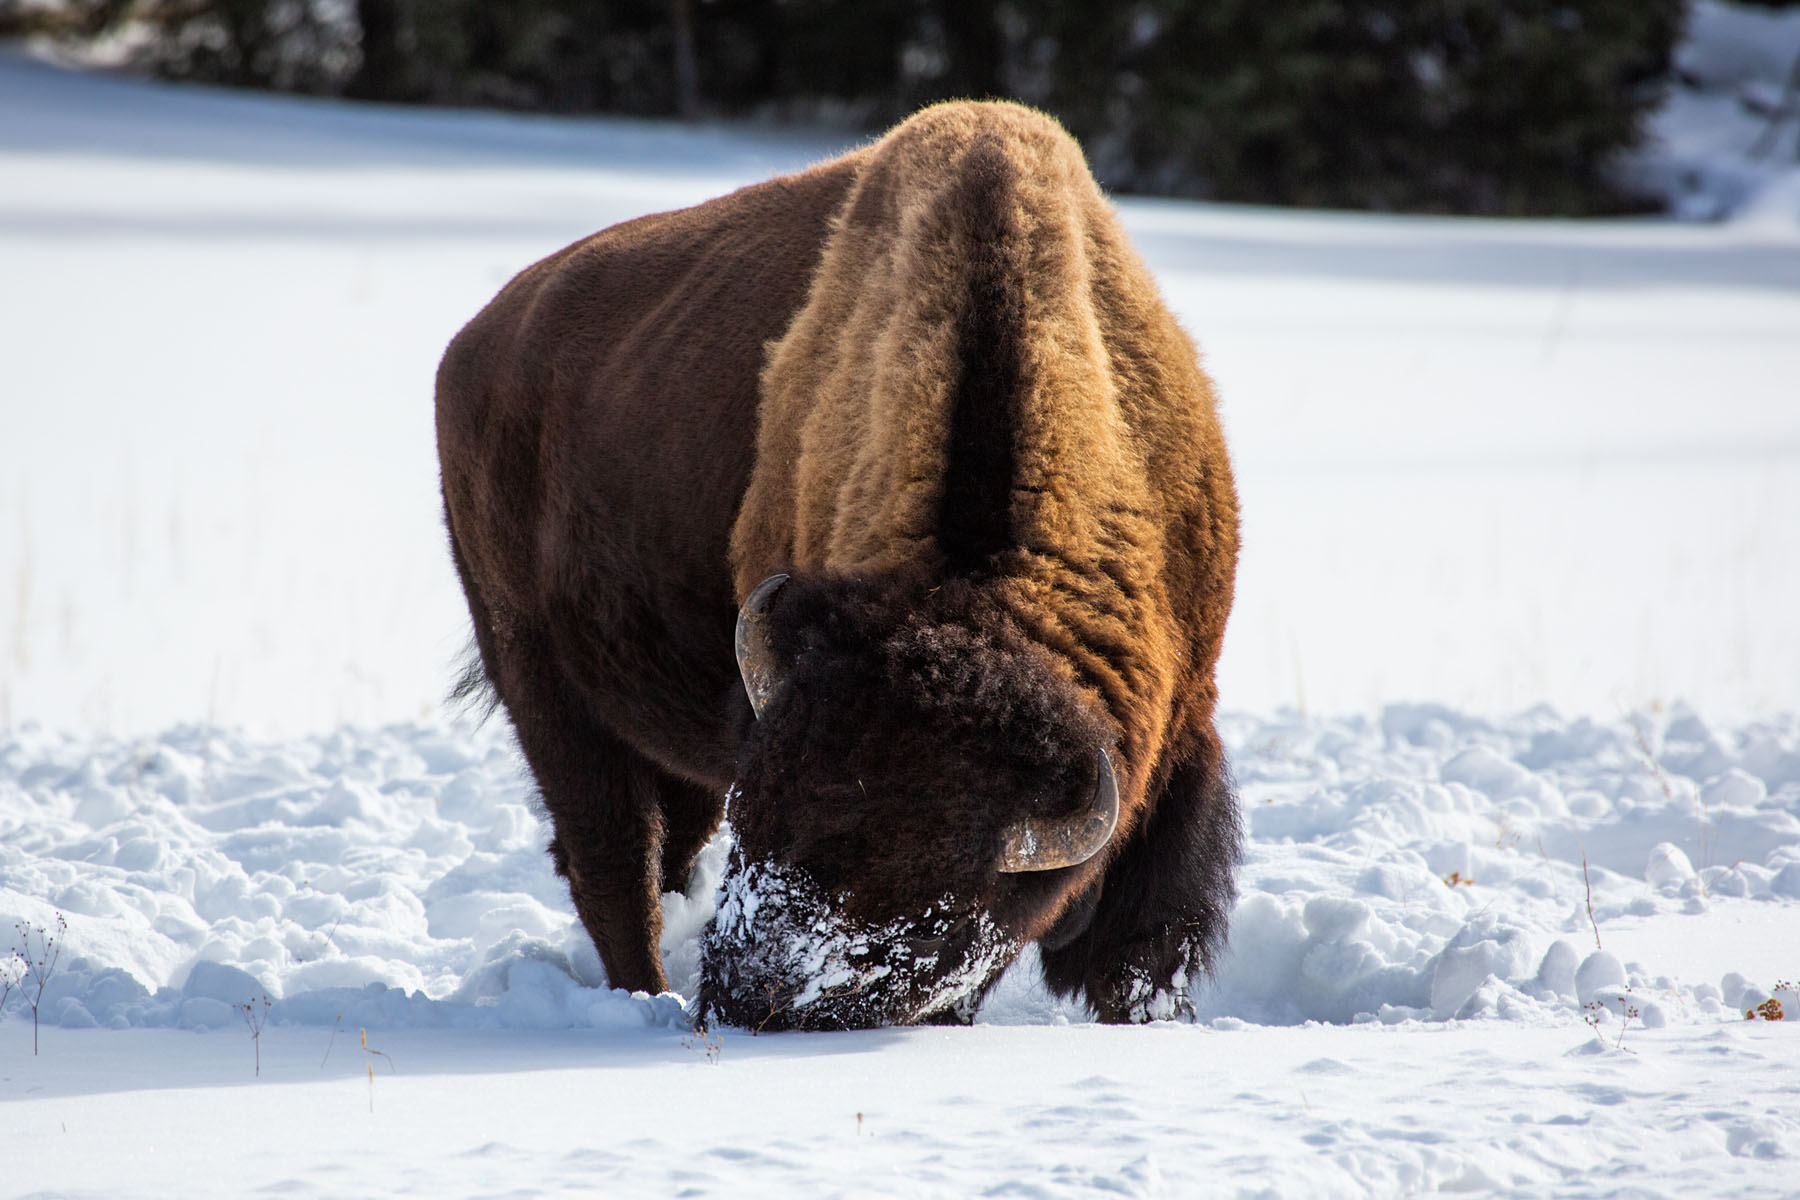 Bison sweeps the snow with its head to get at the grass, Yellowstone, February 2022.  Click for next photo.